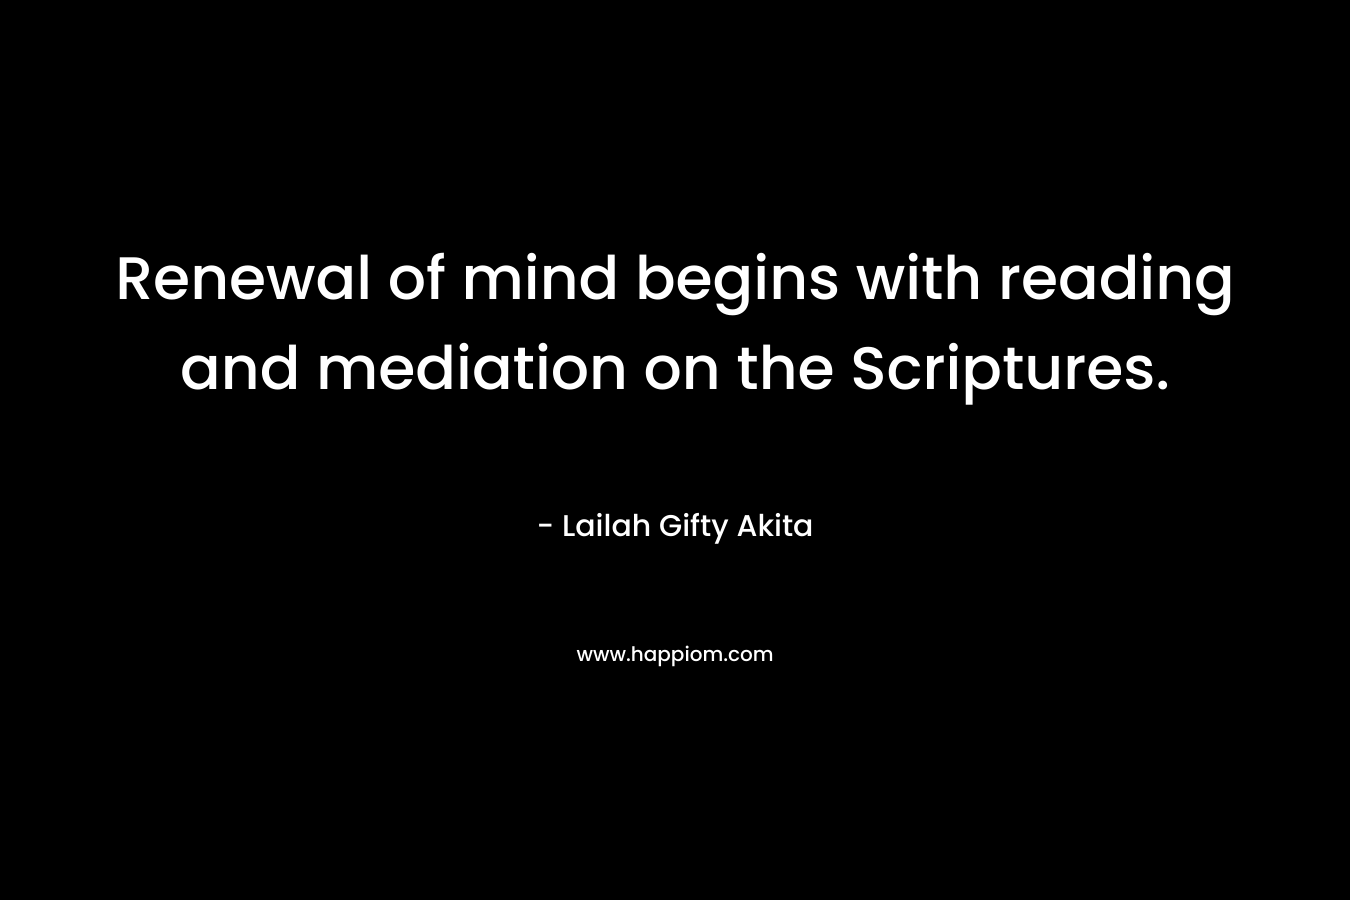 Renewal of mind begins with reading and mediation on the Scriptures.